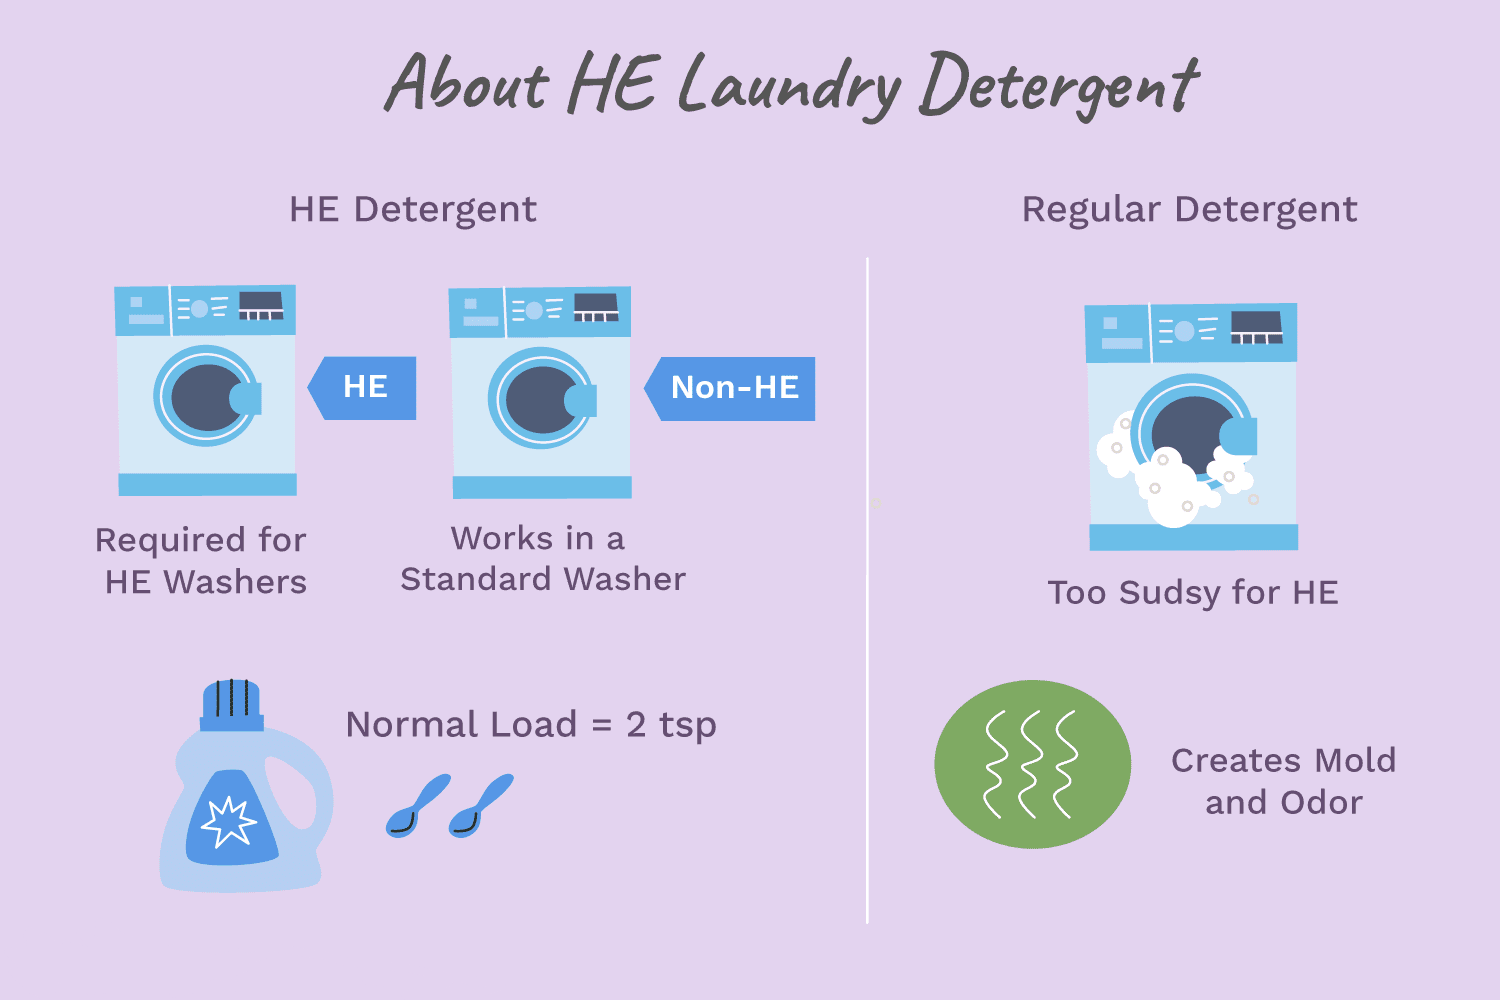 About HE Laundry Detergent